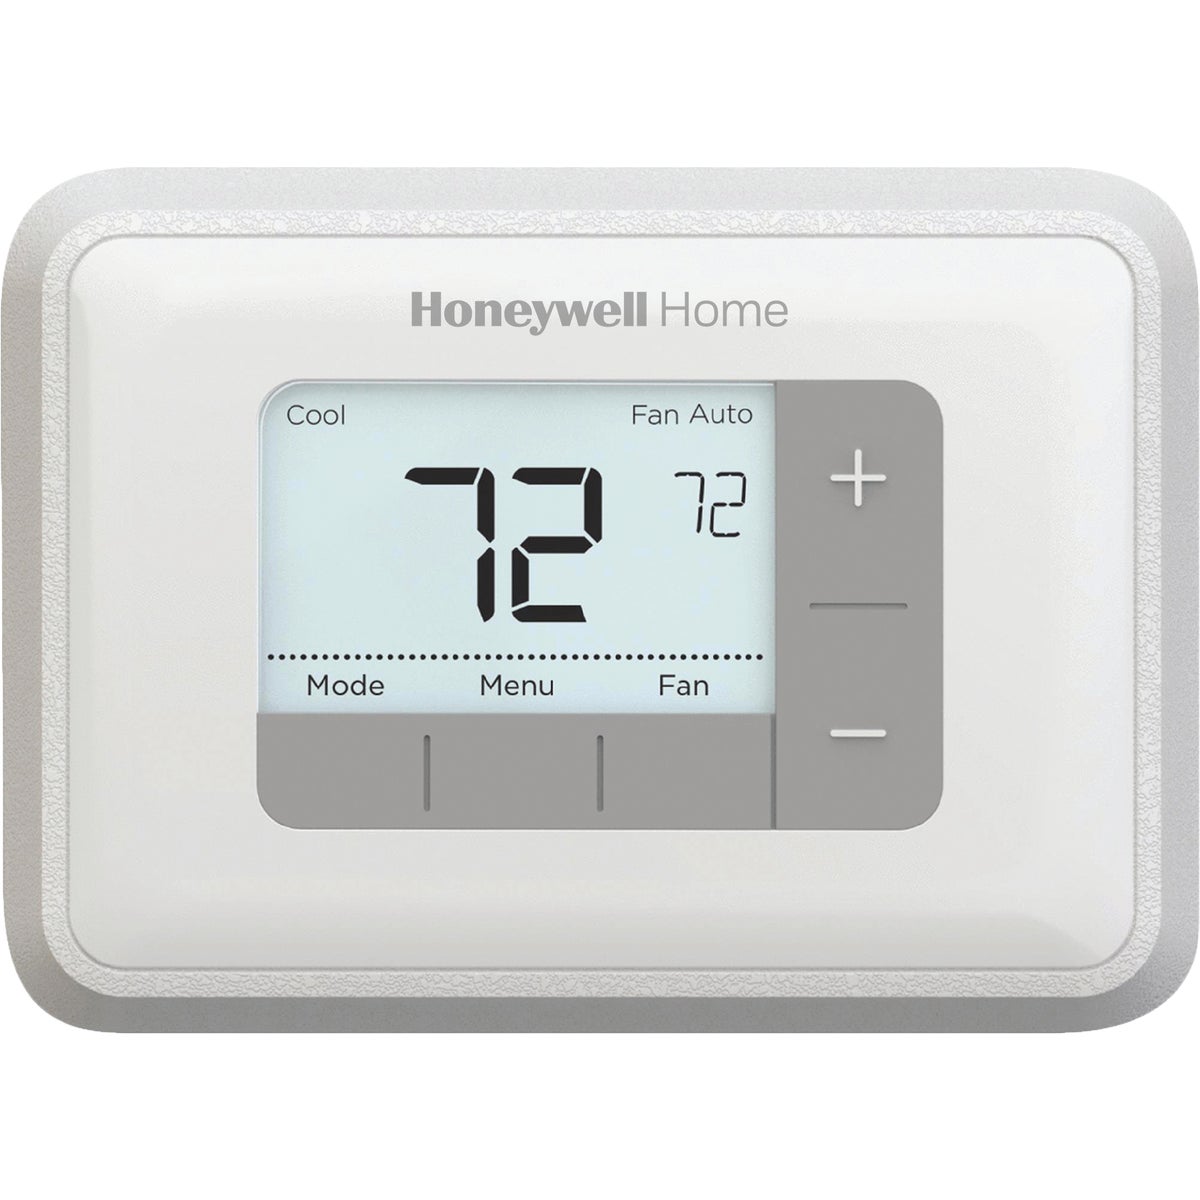 Honeywell Home 5-2 Day Programmable White Digital Thermostat